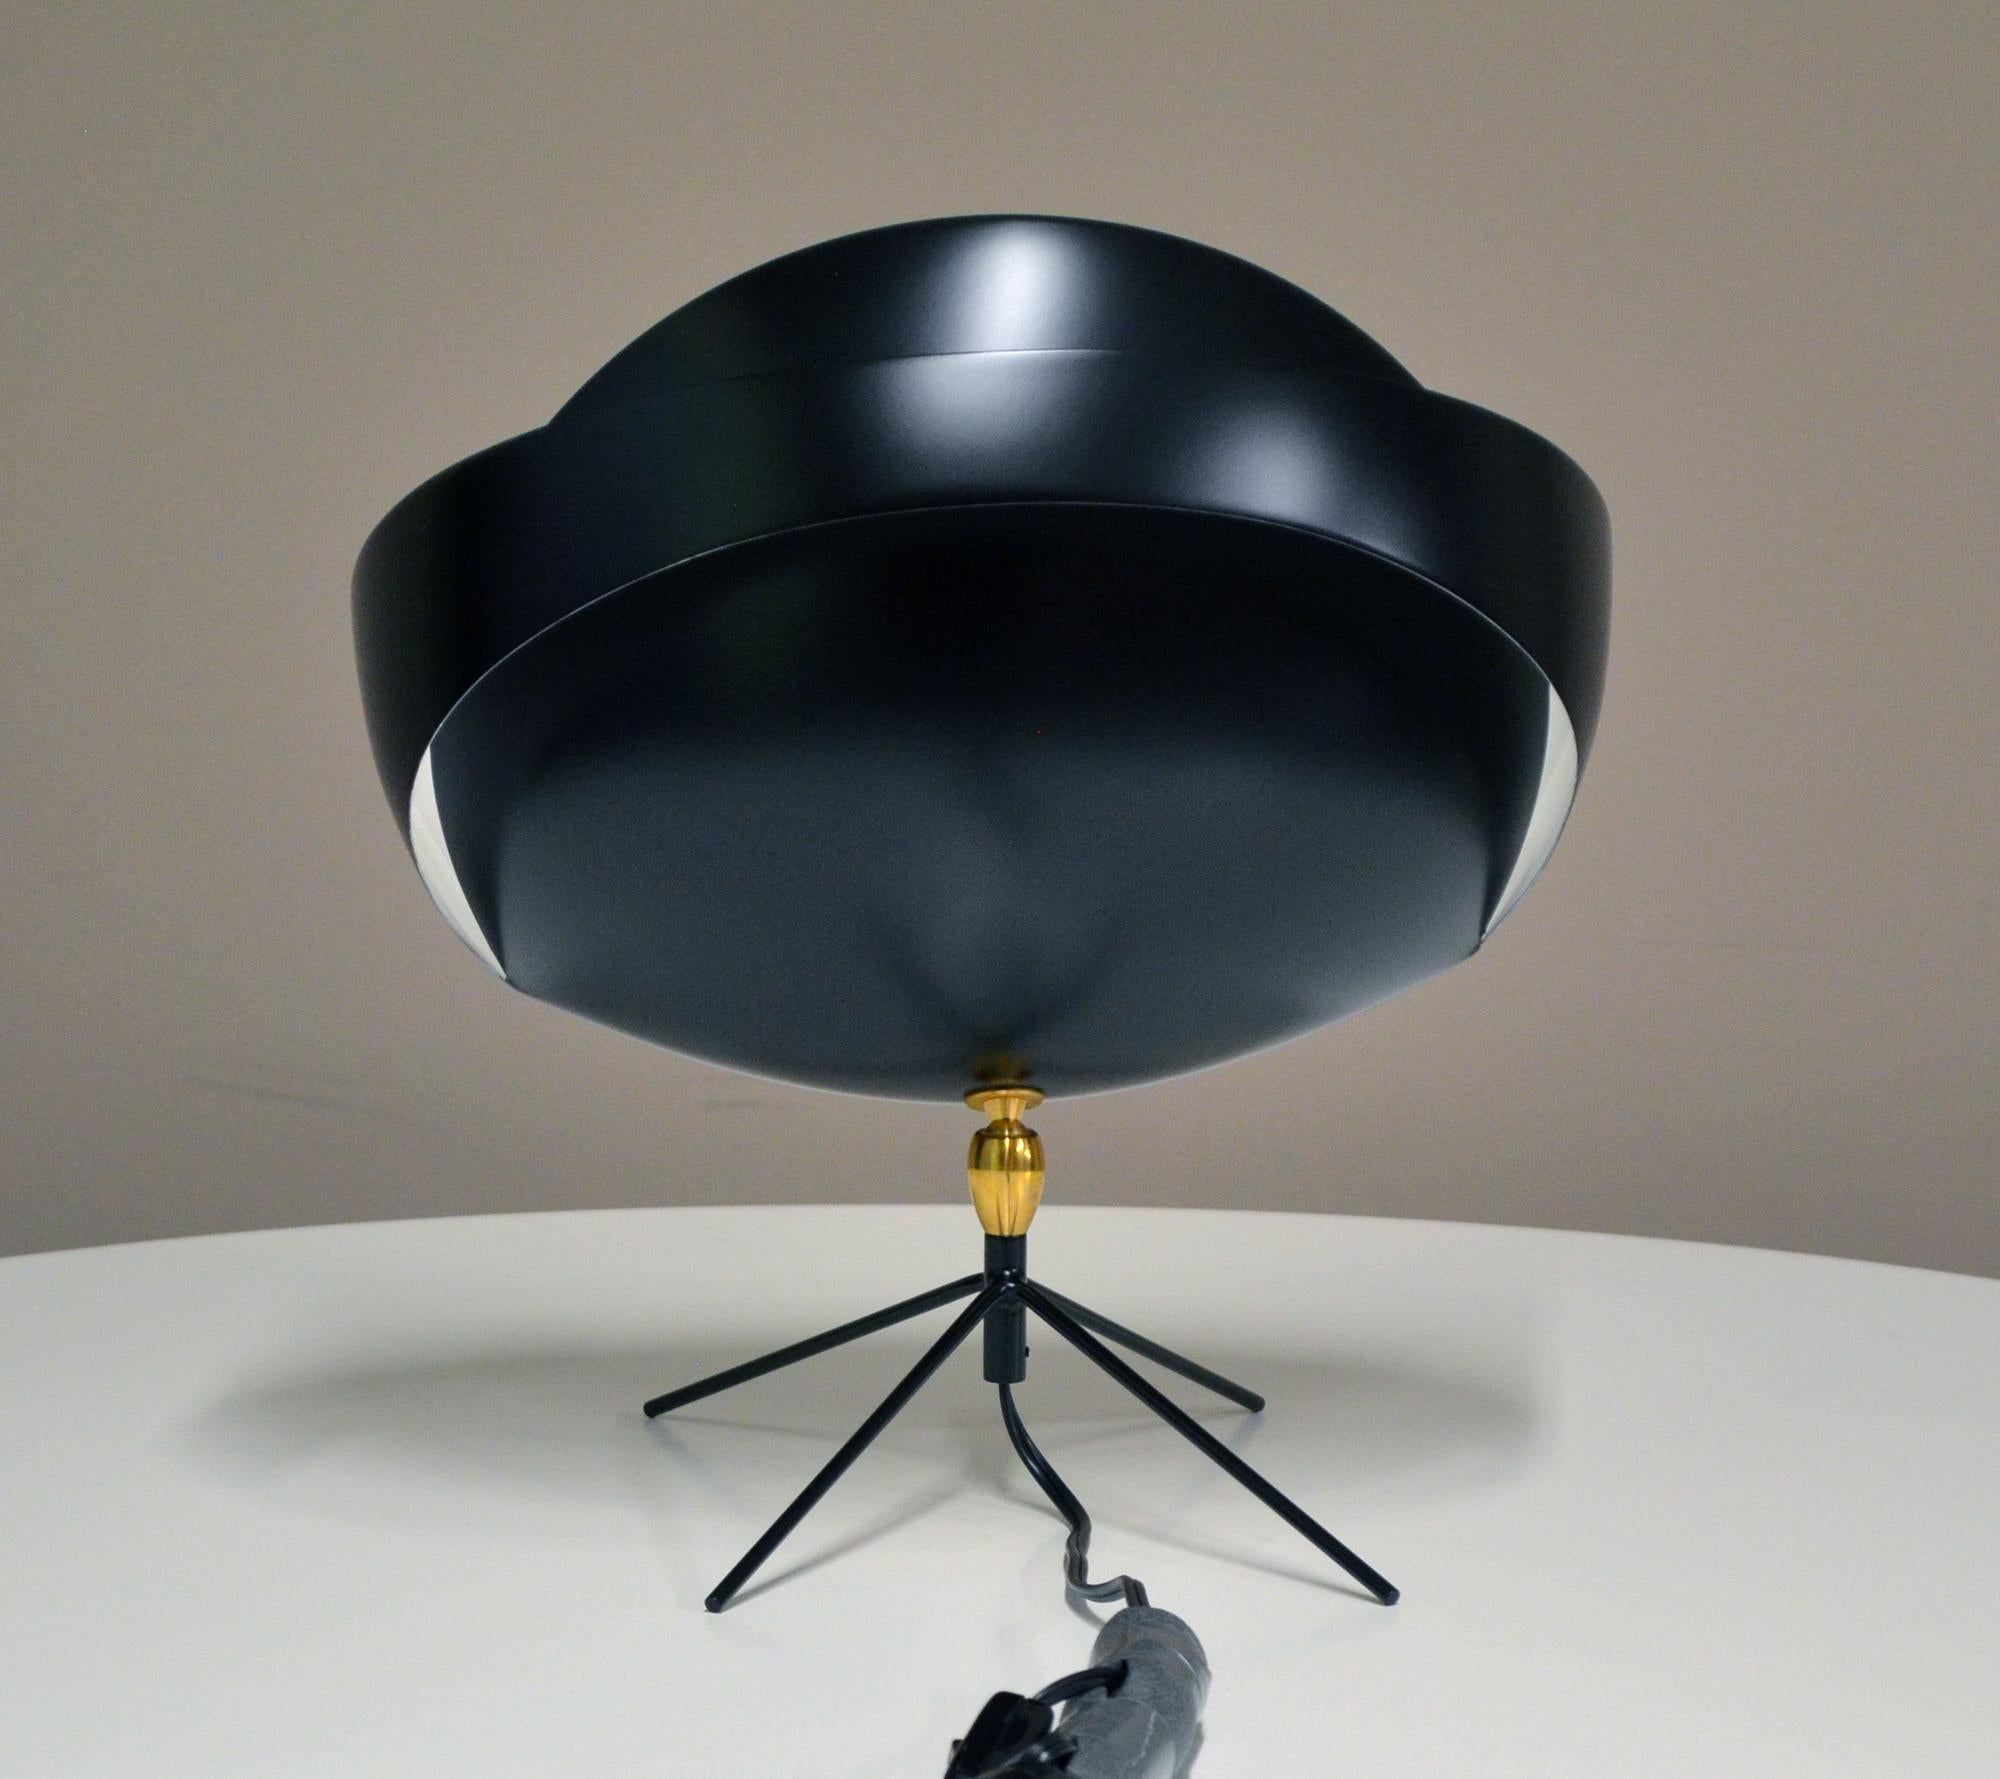 French Serge Mouille - Saturn Desk Lamp For Sale